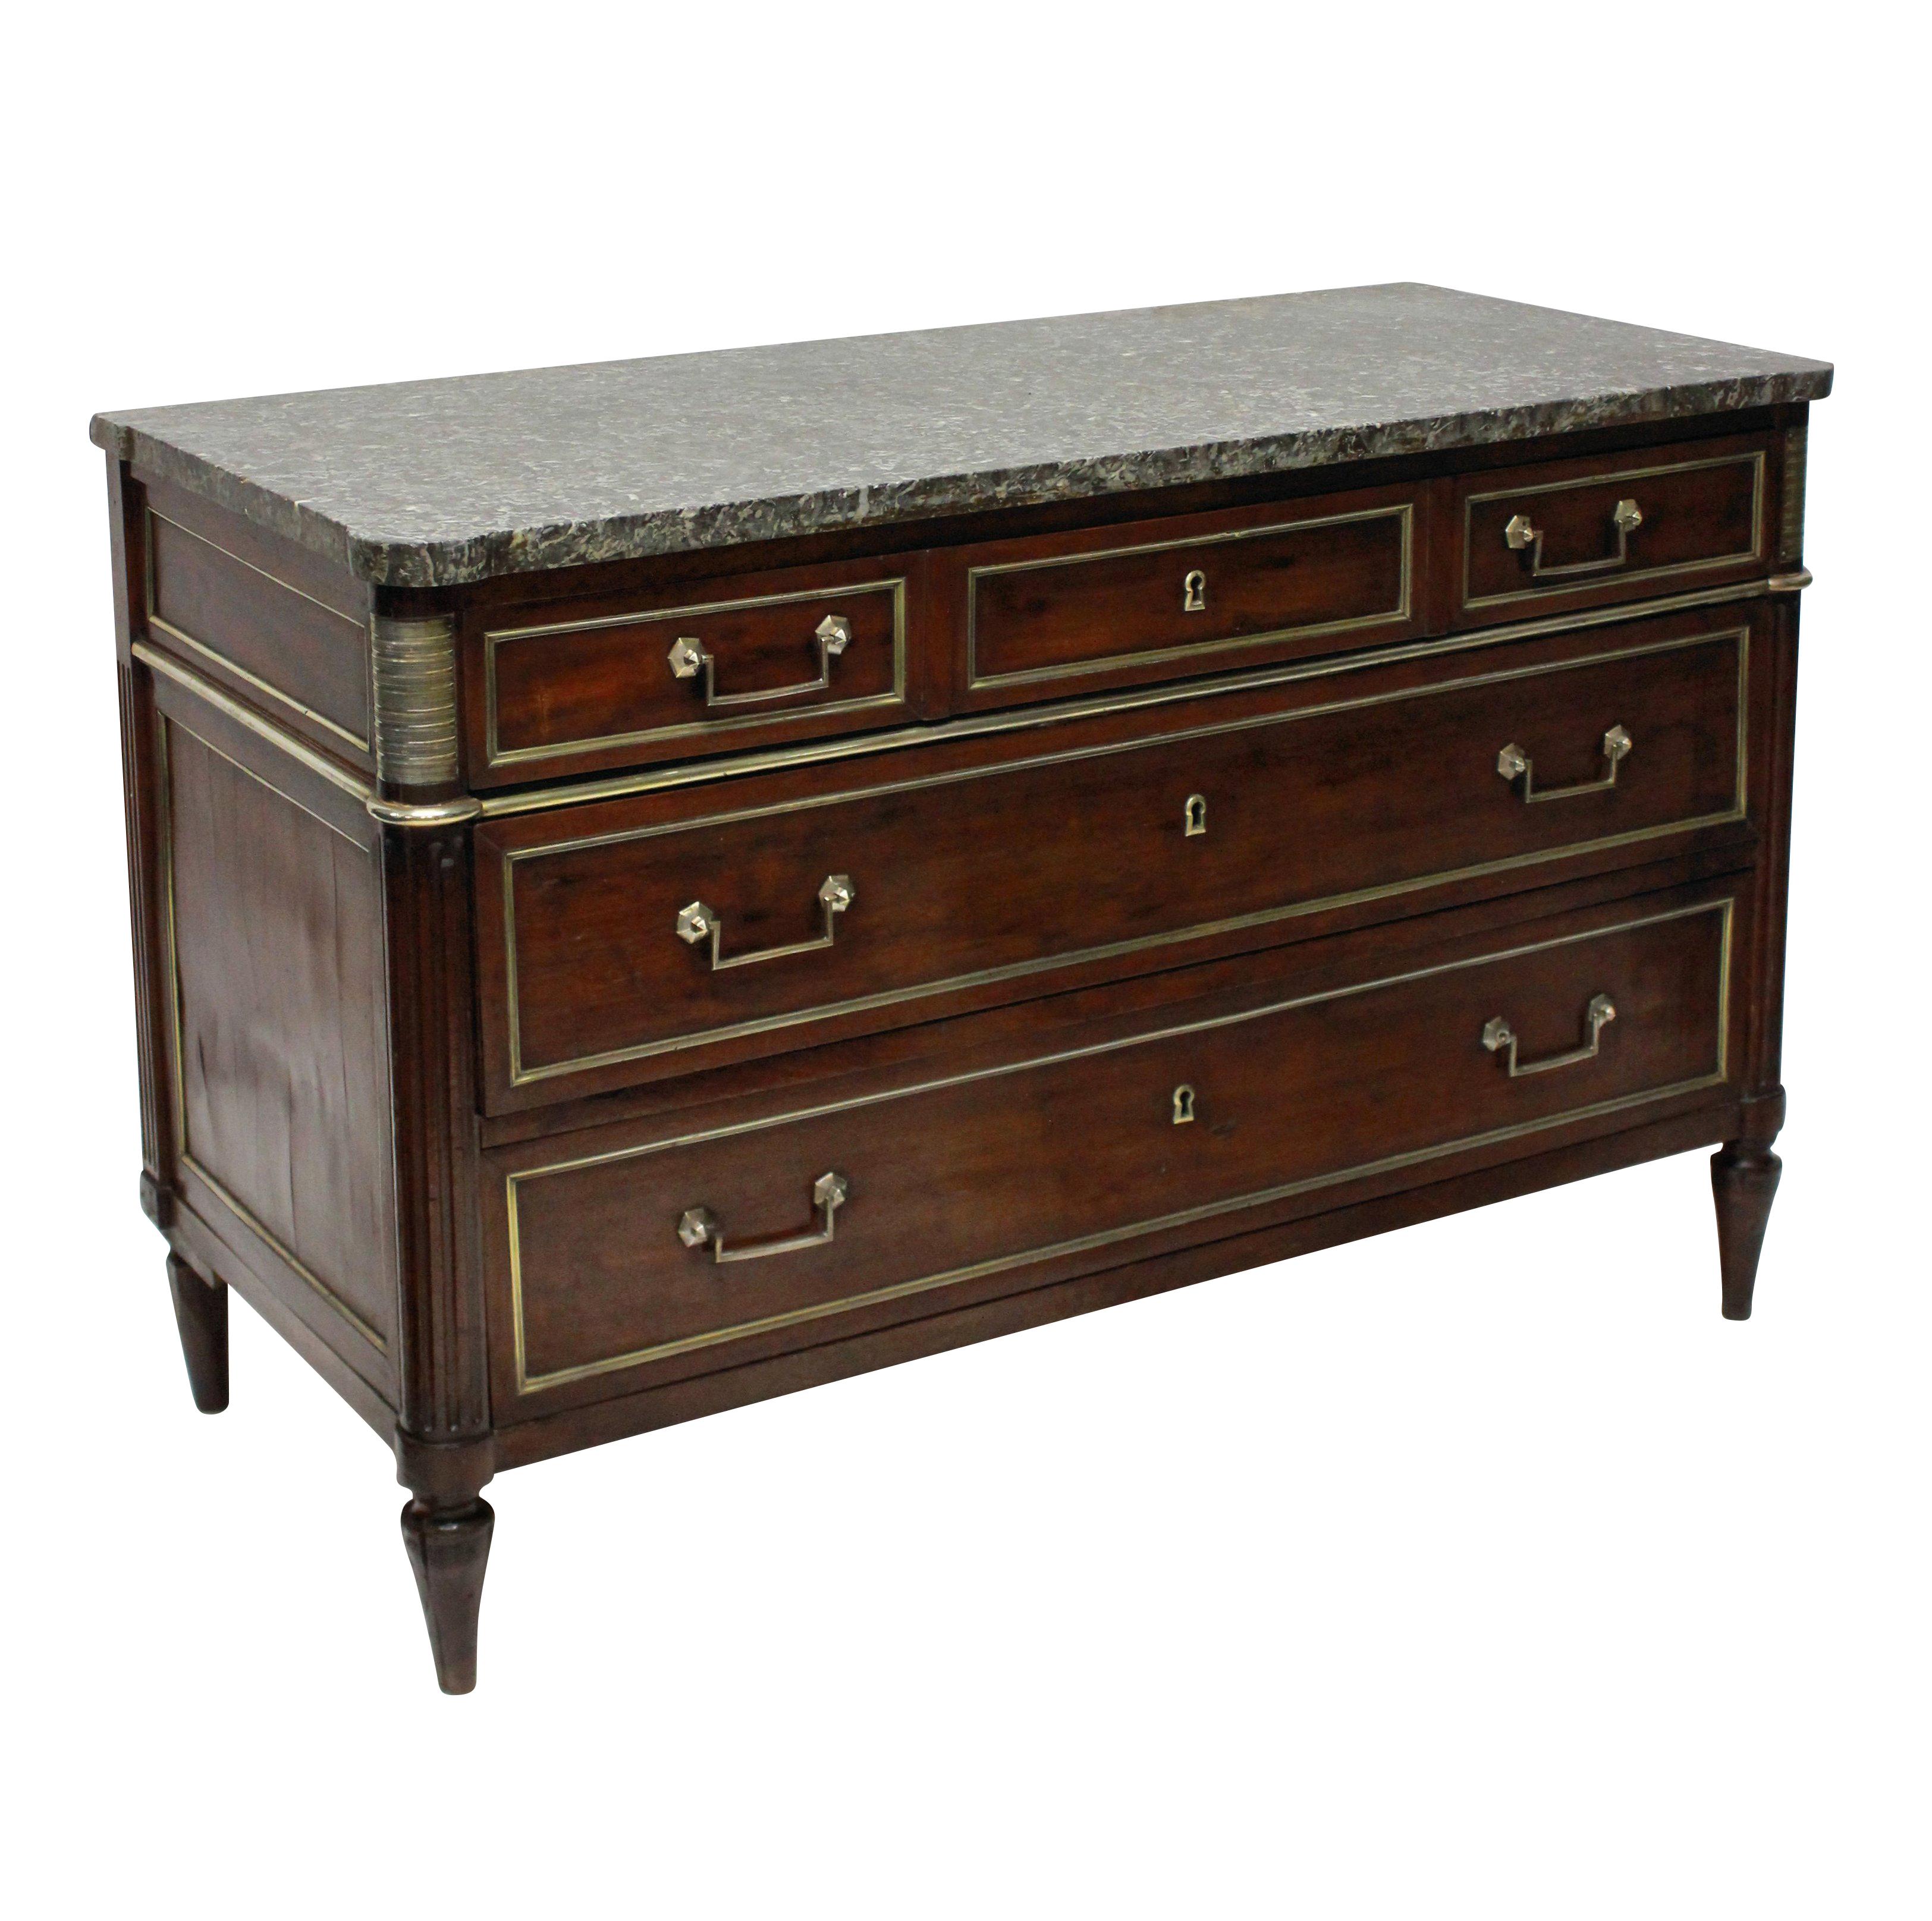 A French Directoire commode in mahogany with oak lined drawers and brass detailing to the drawers, fluted legs, handles and key holes. With its original variegated marble top with a hand written label verso.